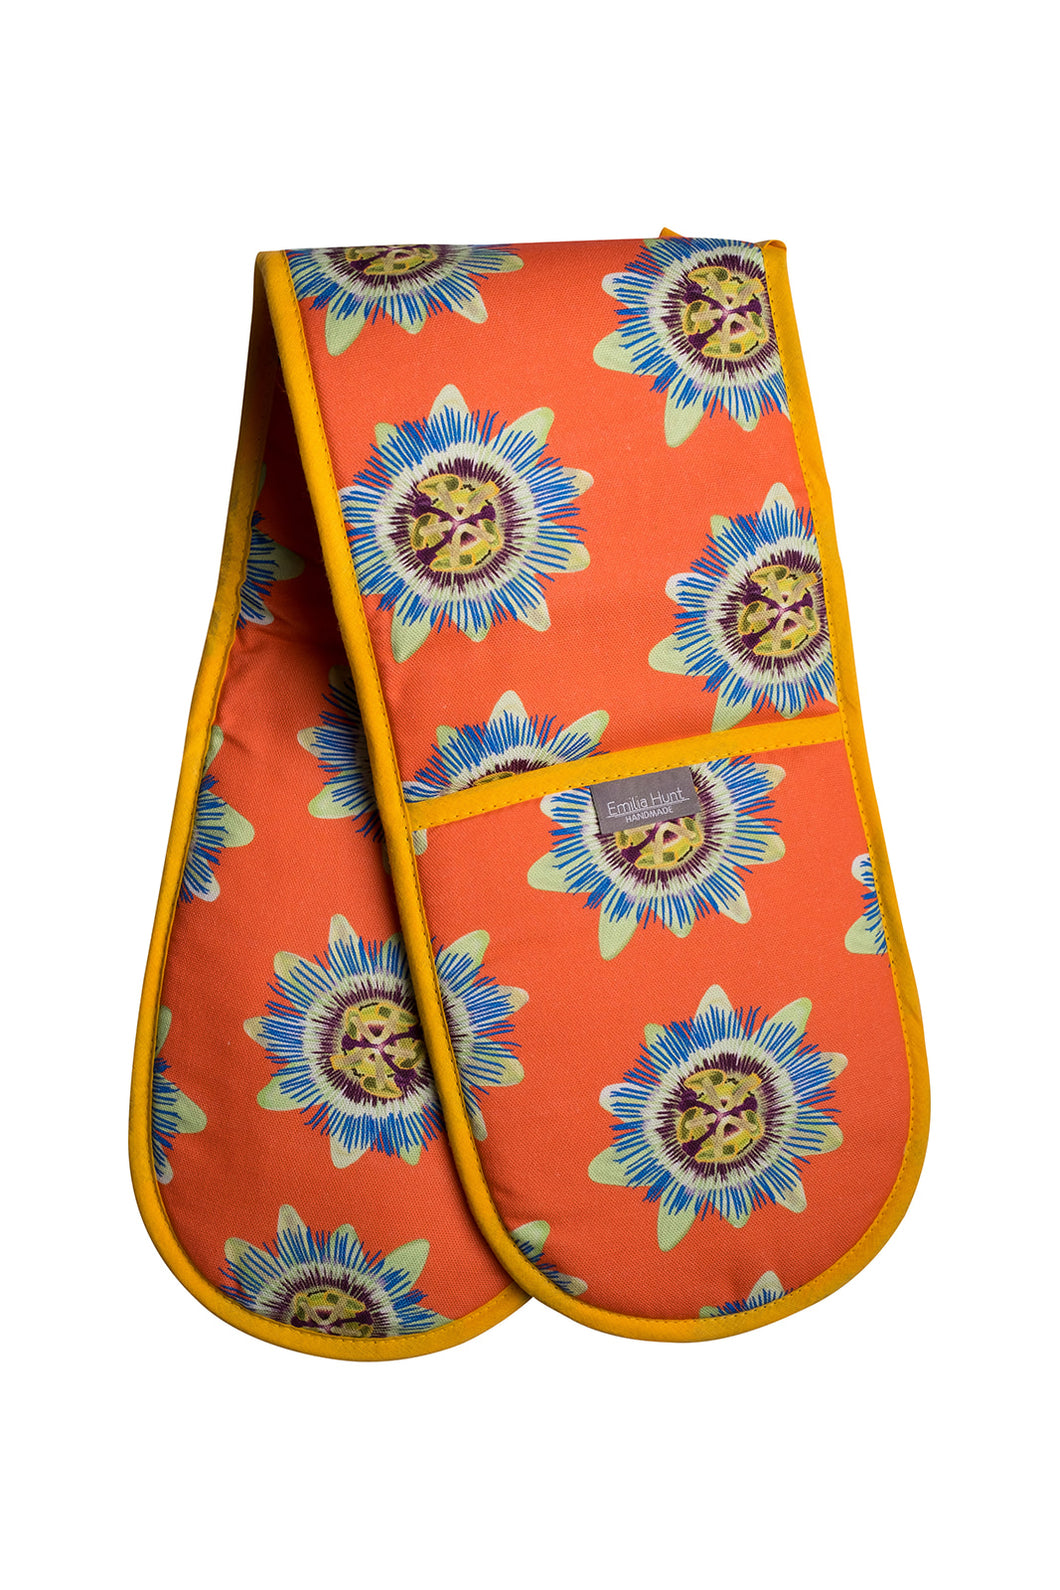 Coral Passion Flower Double Oven Gloves